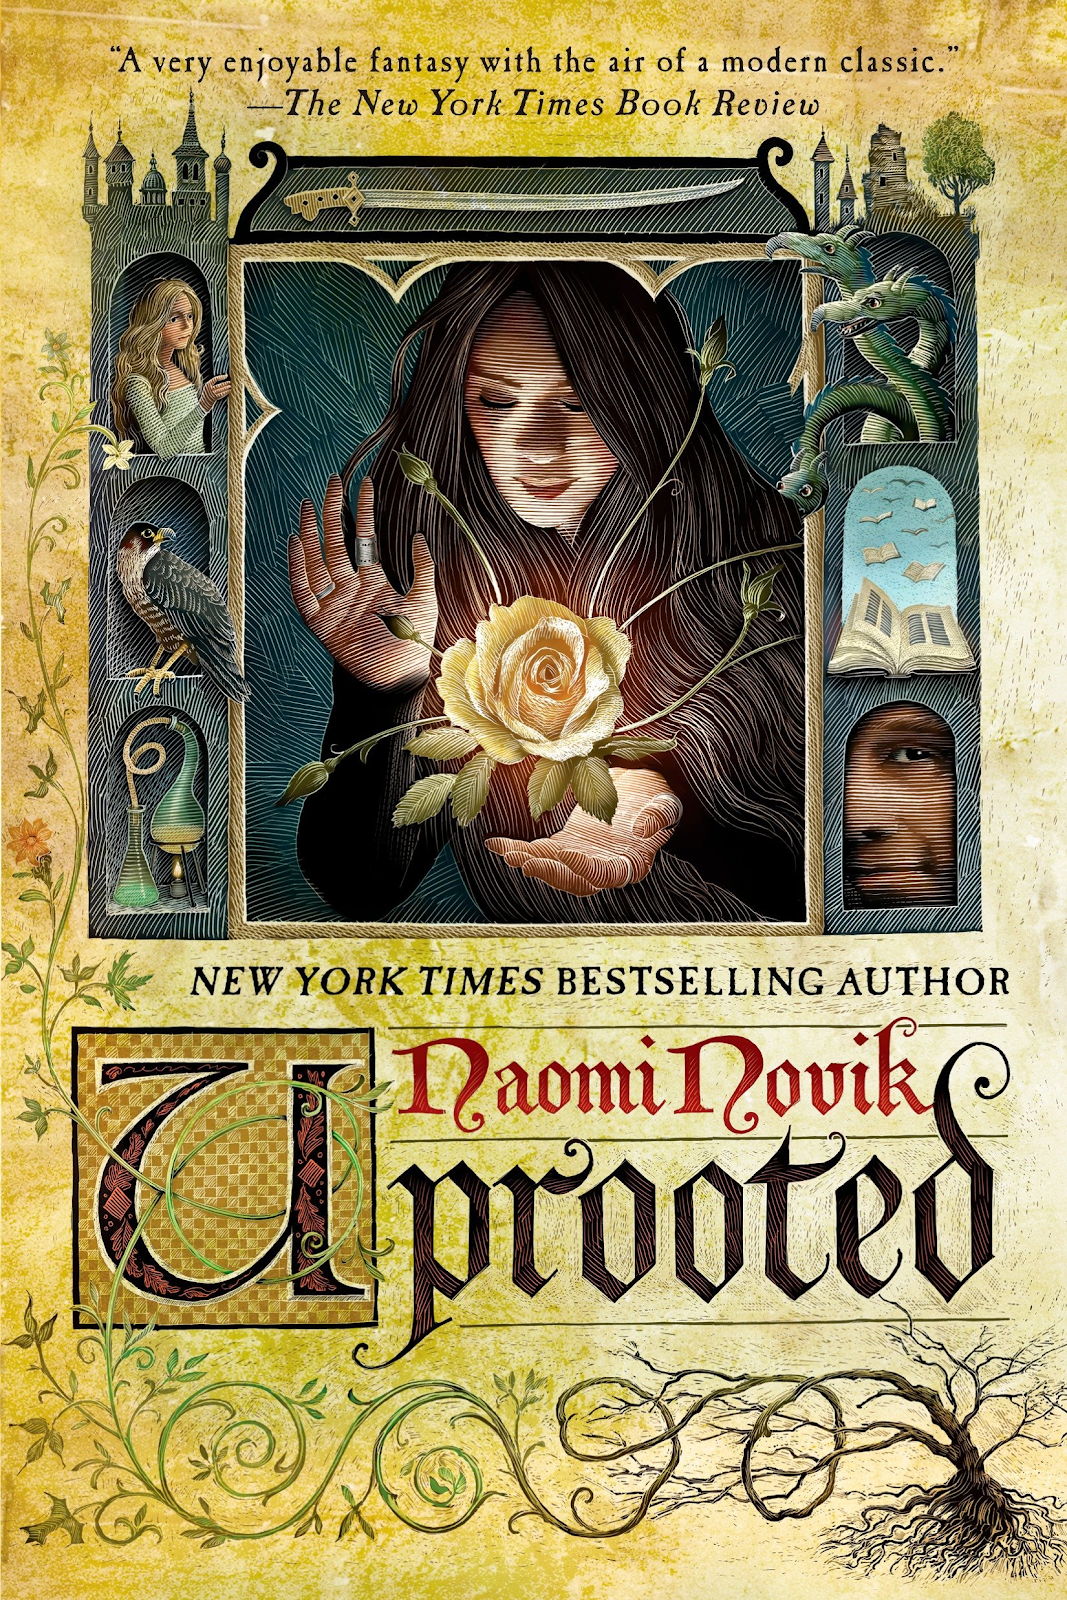 Naomi Novik's Uprooted book cover as an example of a false victory for story beat 9 under story plot structures.